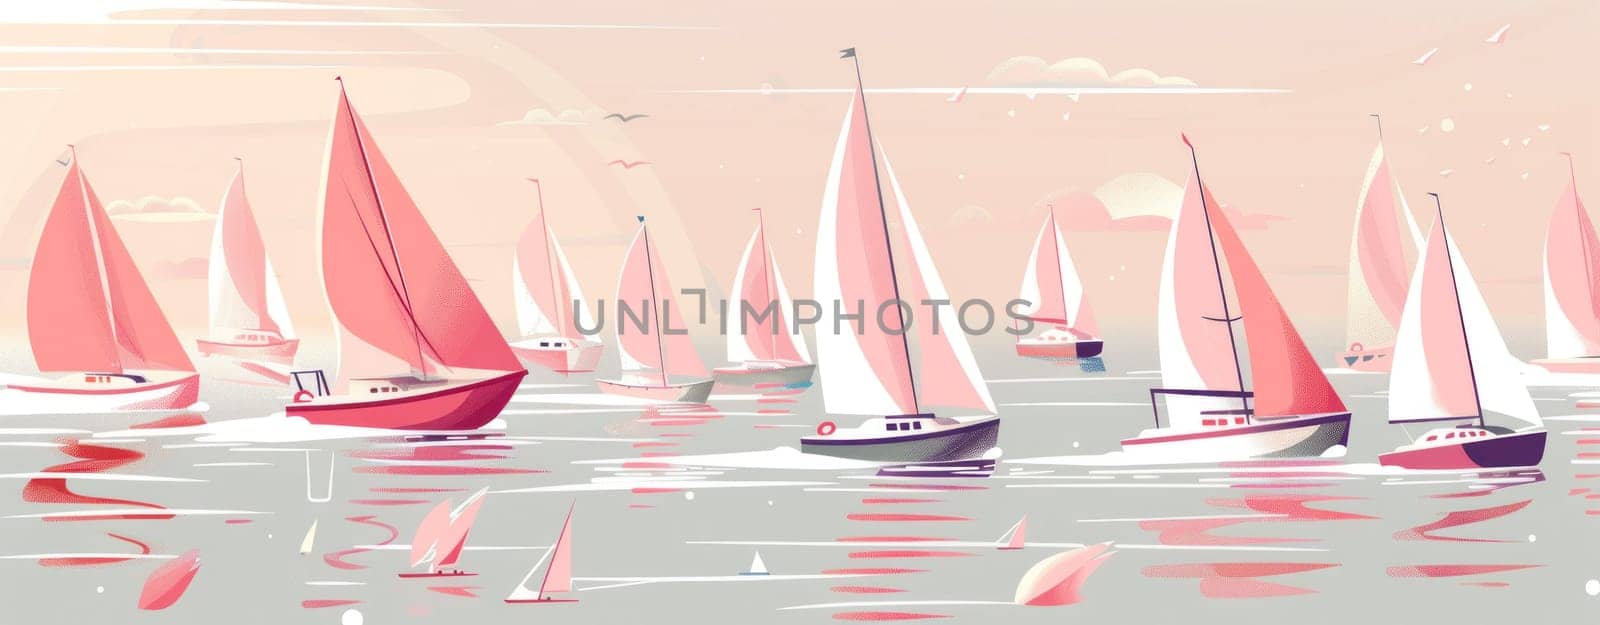 Sailboats on water tranquil pink and white seascape with clouds in background for travel and relaxation inspiration